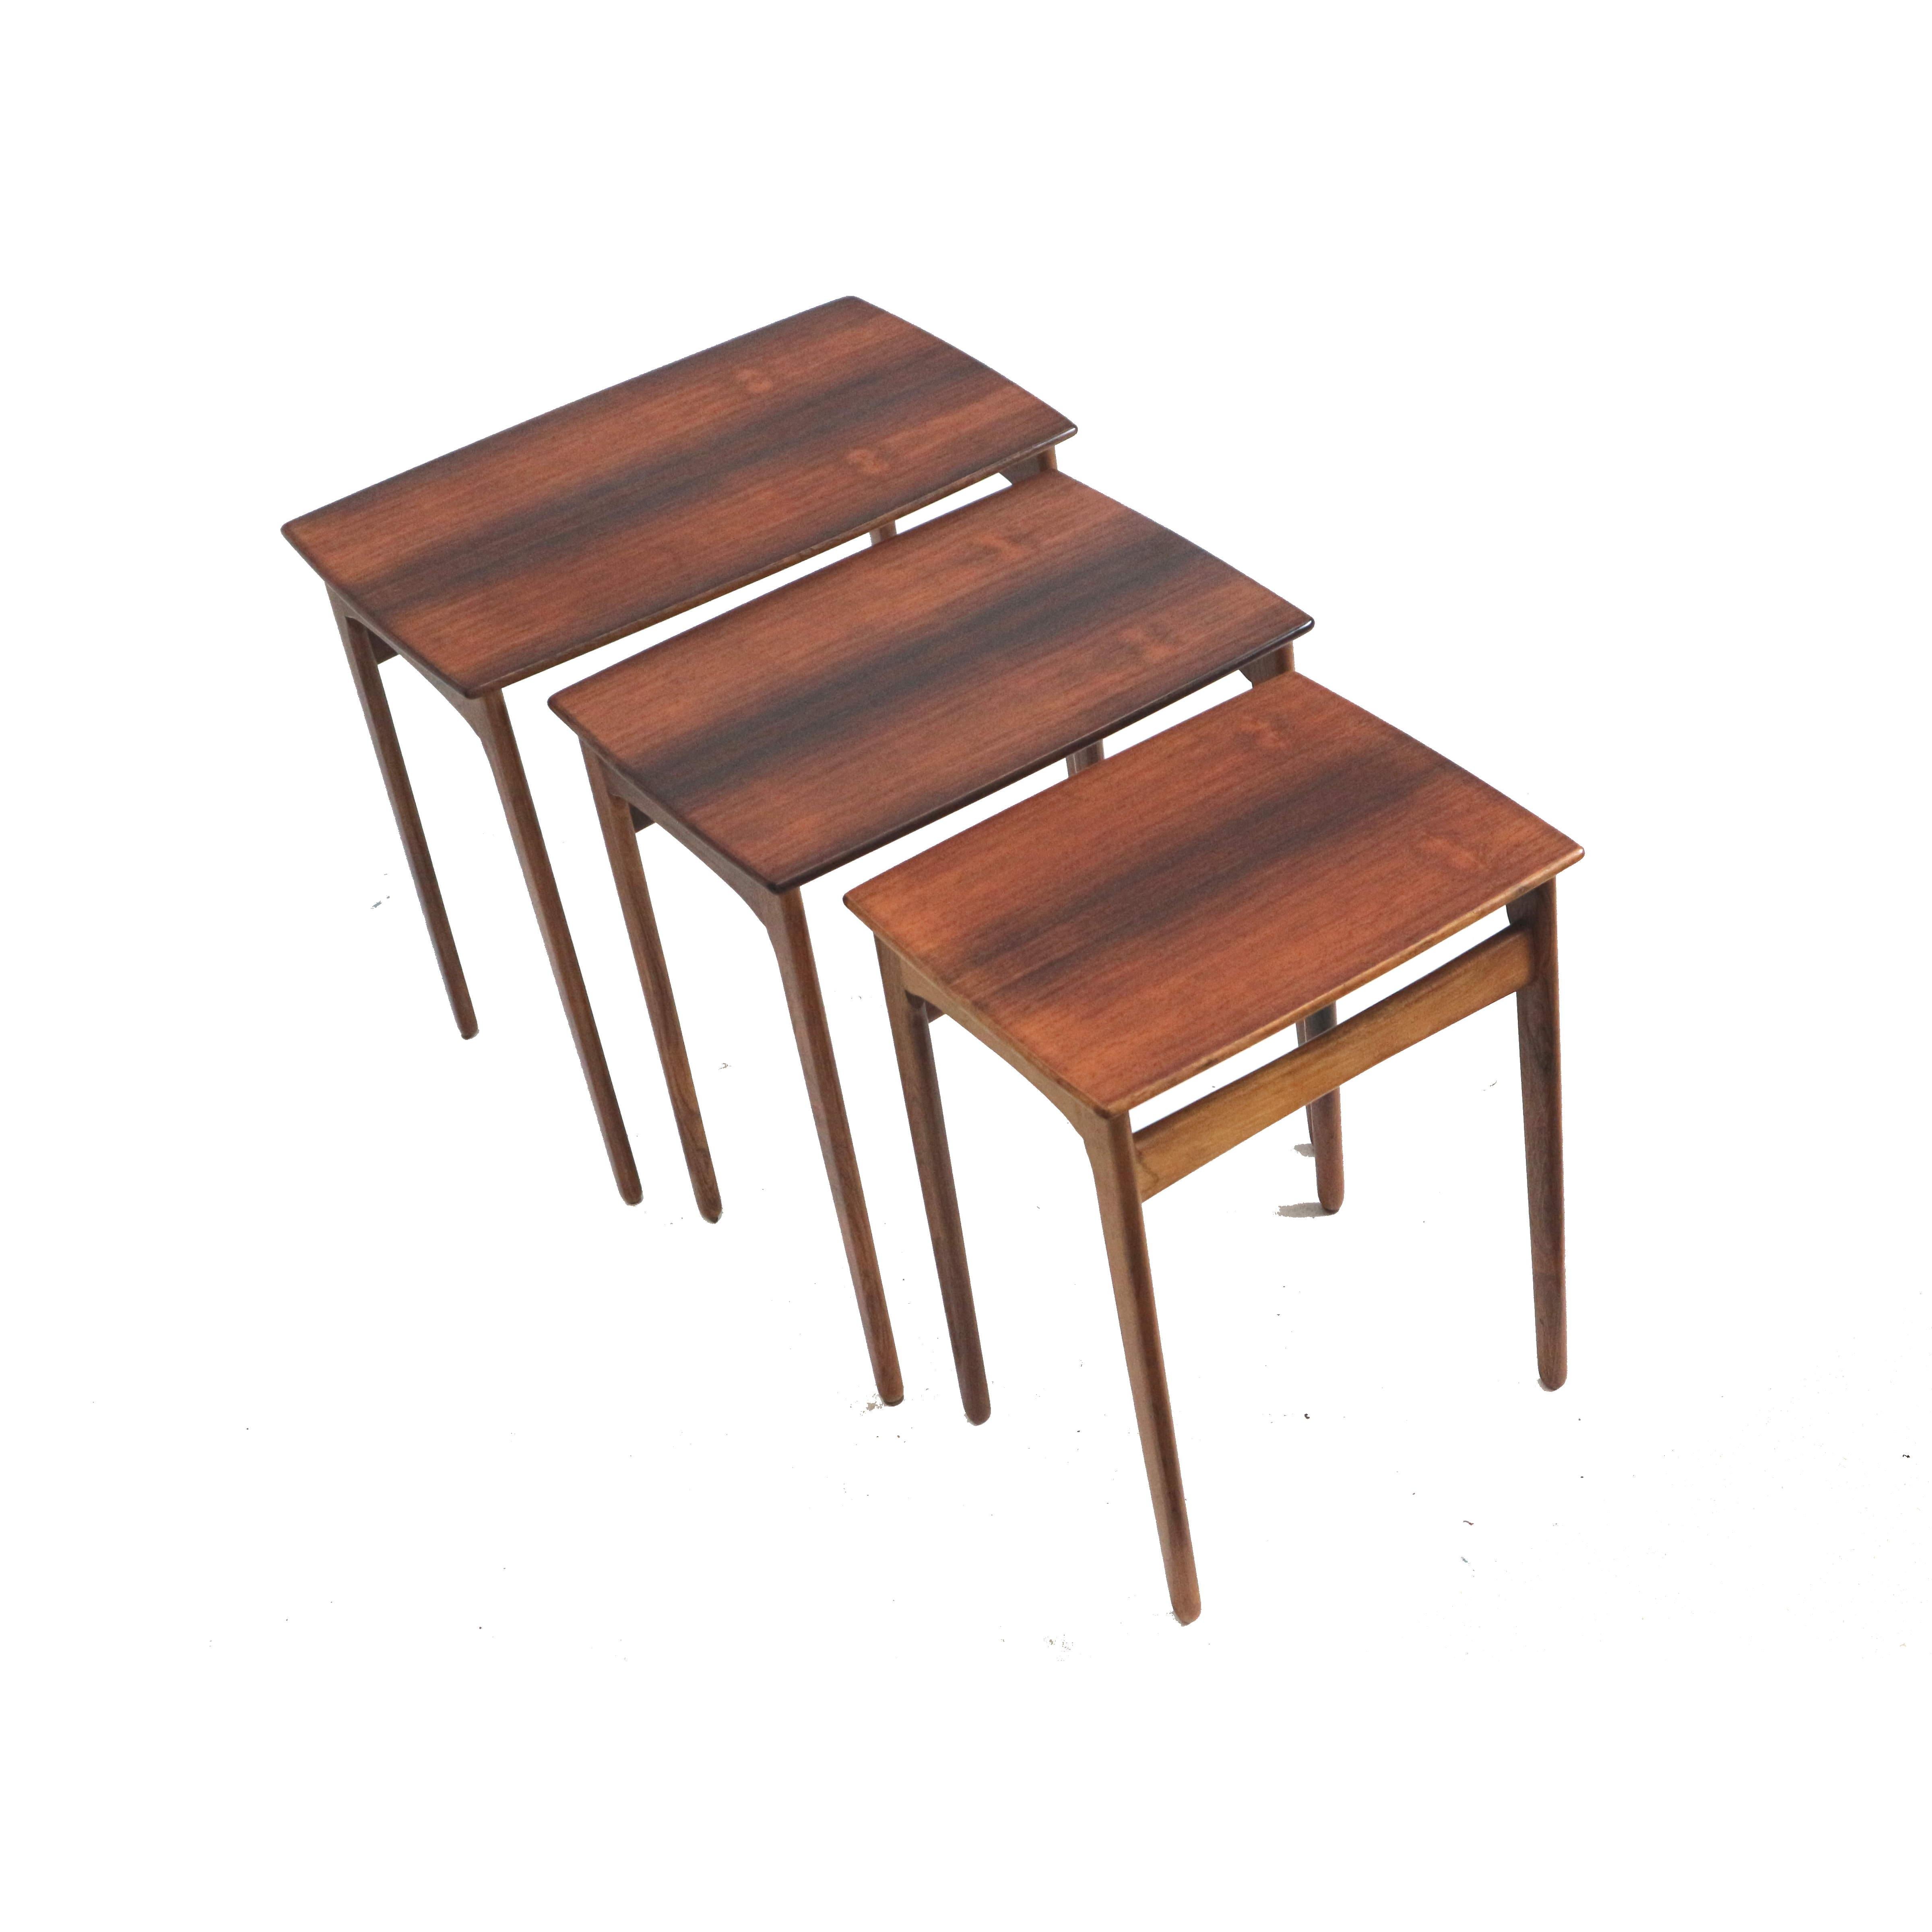 Danish vintage rosewood nesting tables / set of 3 side tables made in the 60s For Sale 1